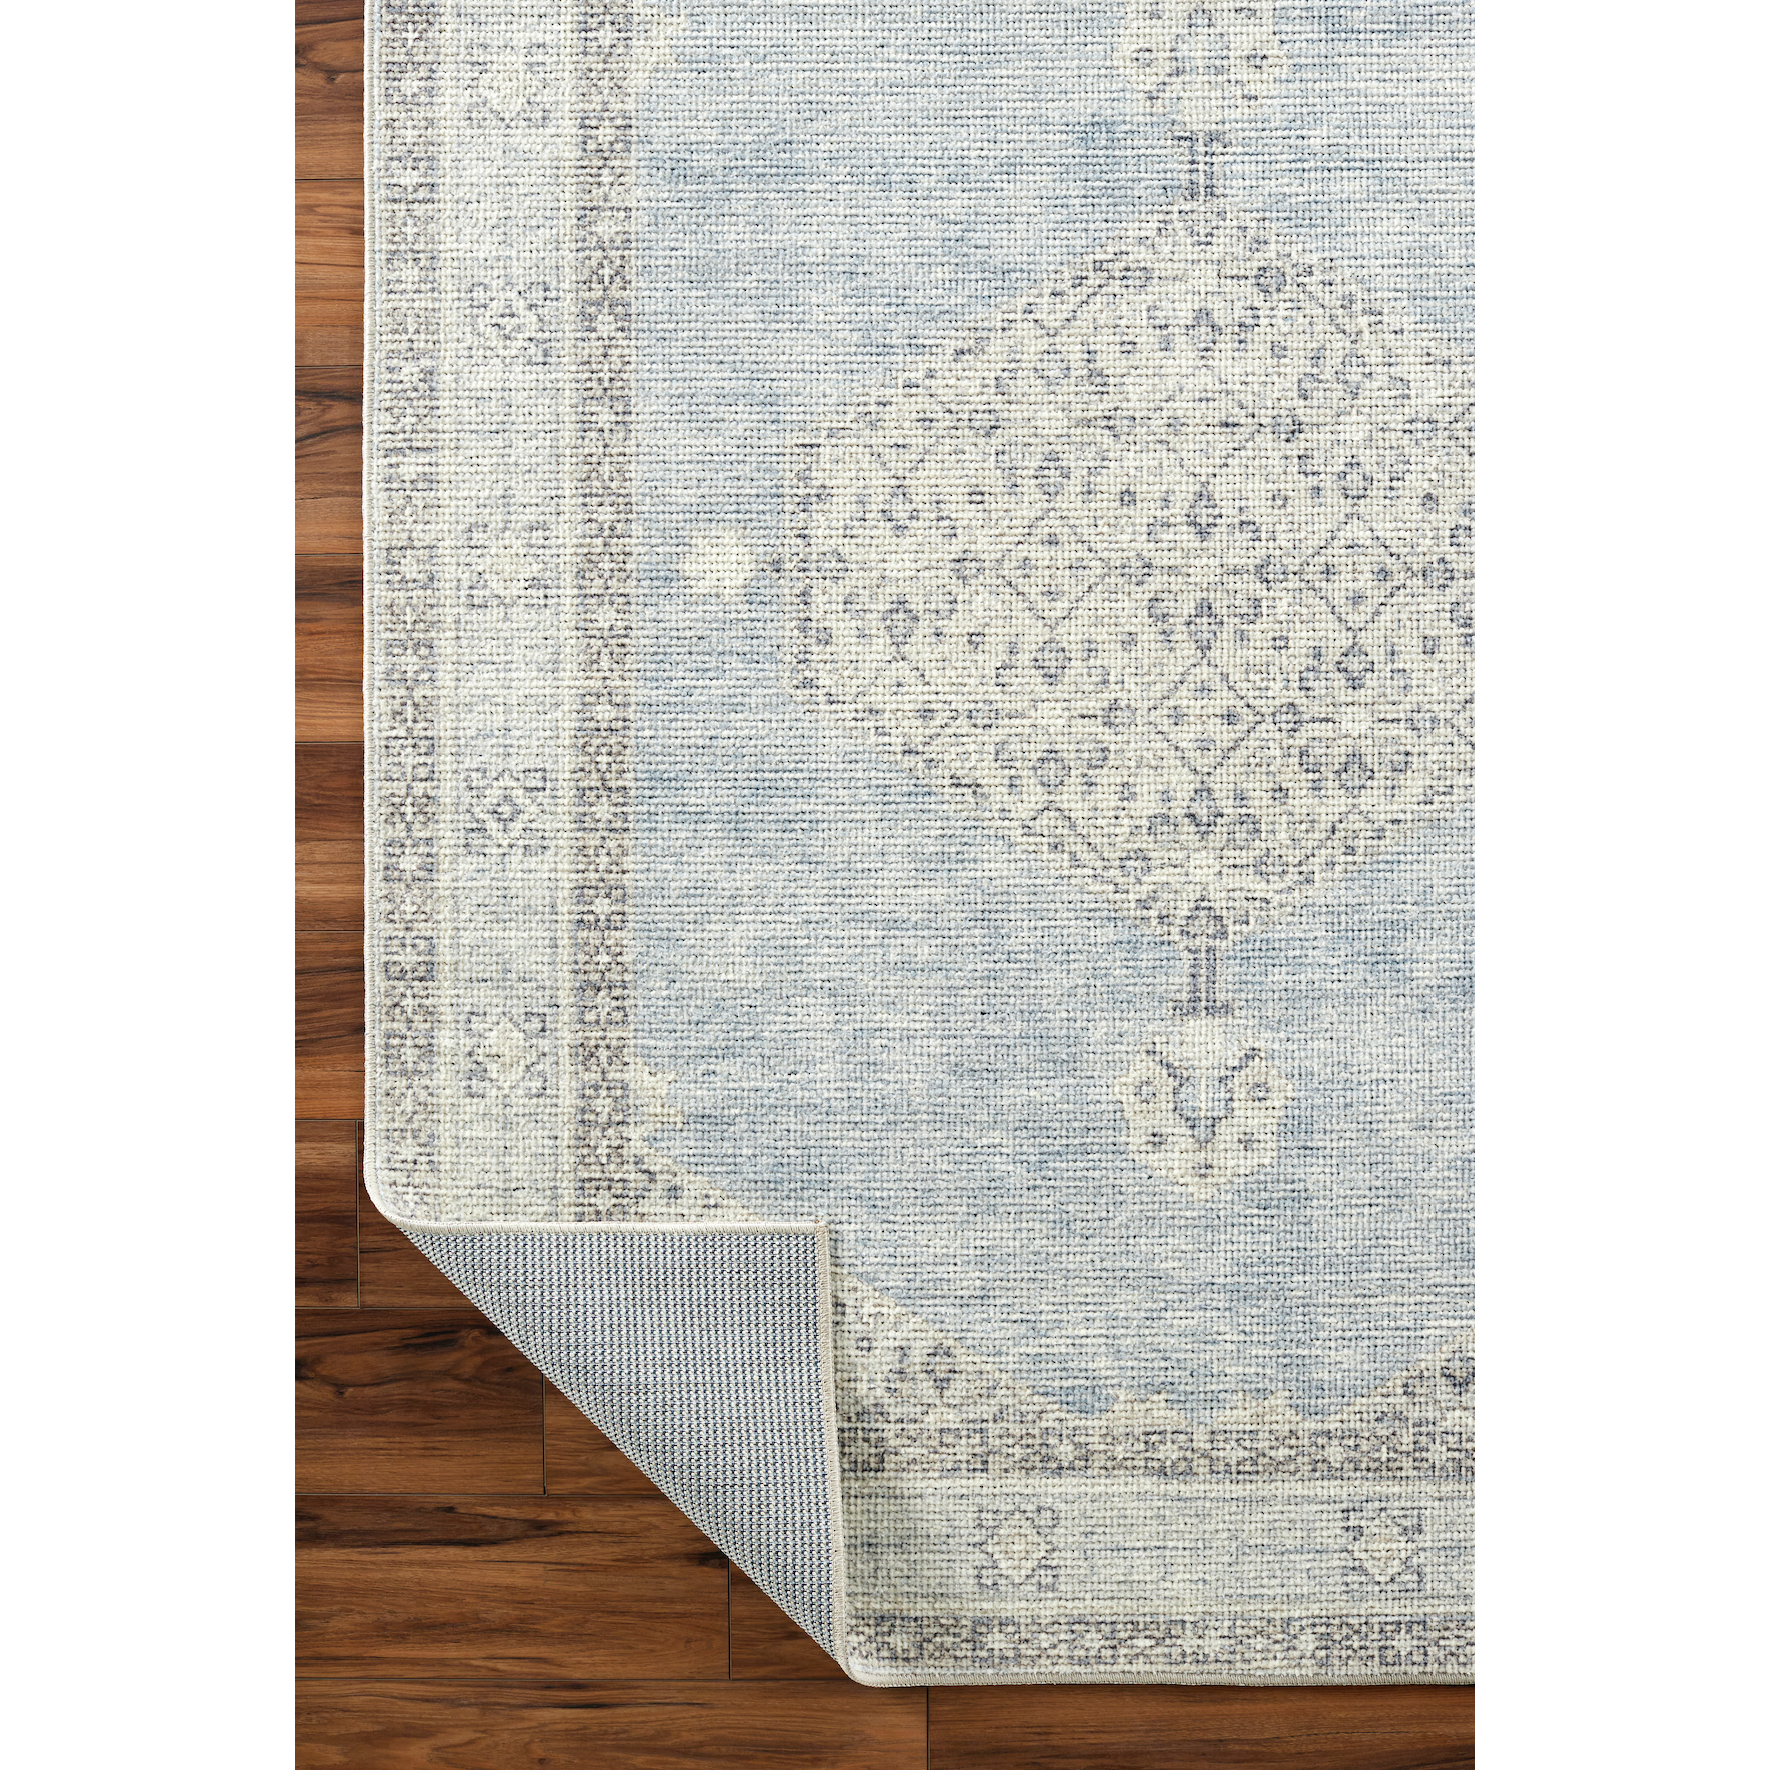 Brought to you by Becki Owens x Surya, the Lila Denim medallion area rug combines rich, detailed design with warm soft neutrals and tones to create an inviting space that will always feel familiar. Amethyst Home provides interior design, new construction, custom furniture, and area rugs in the Atlanta metro area.